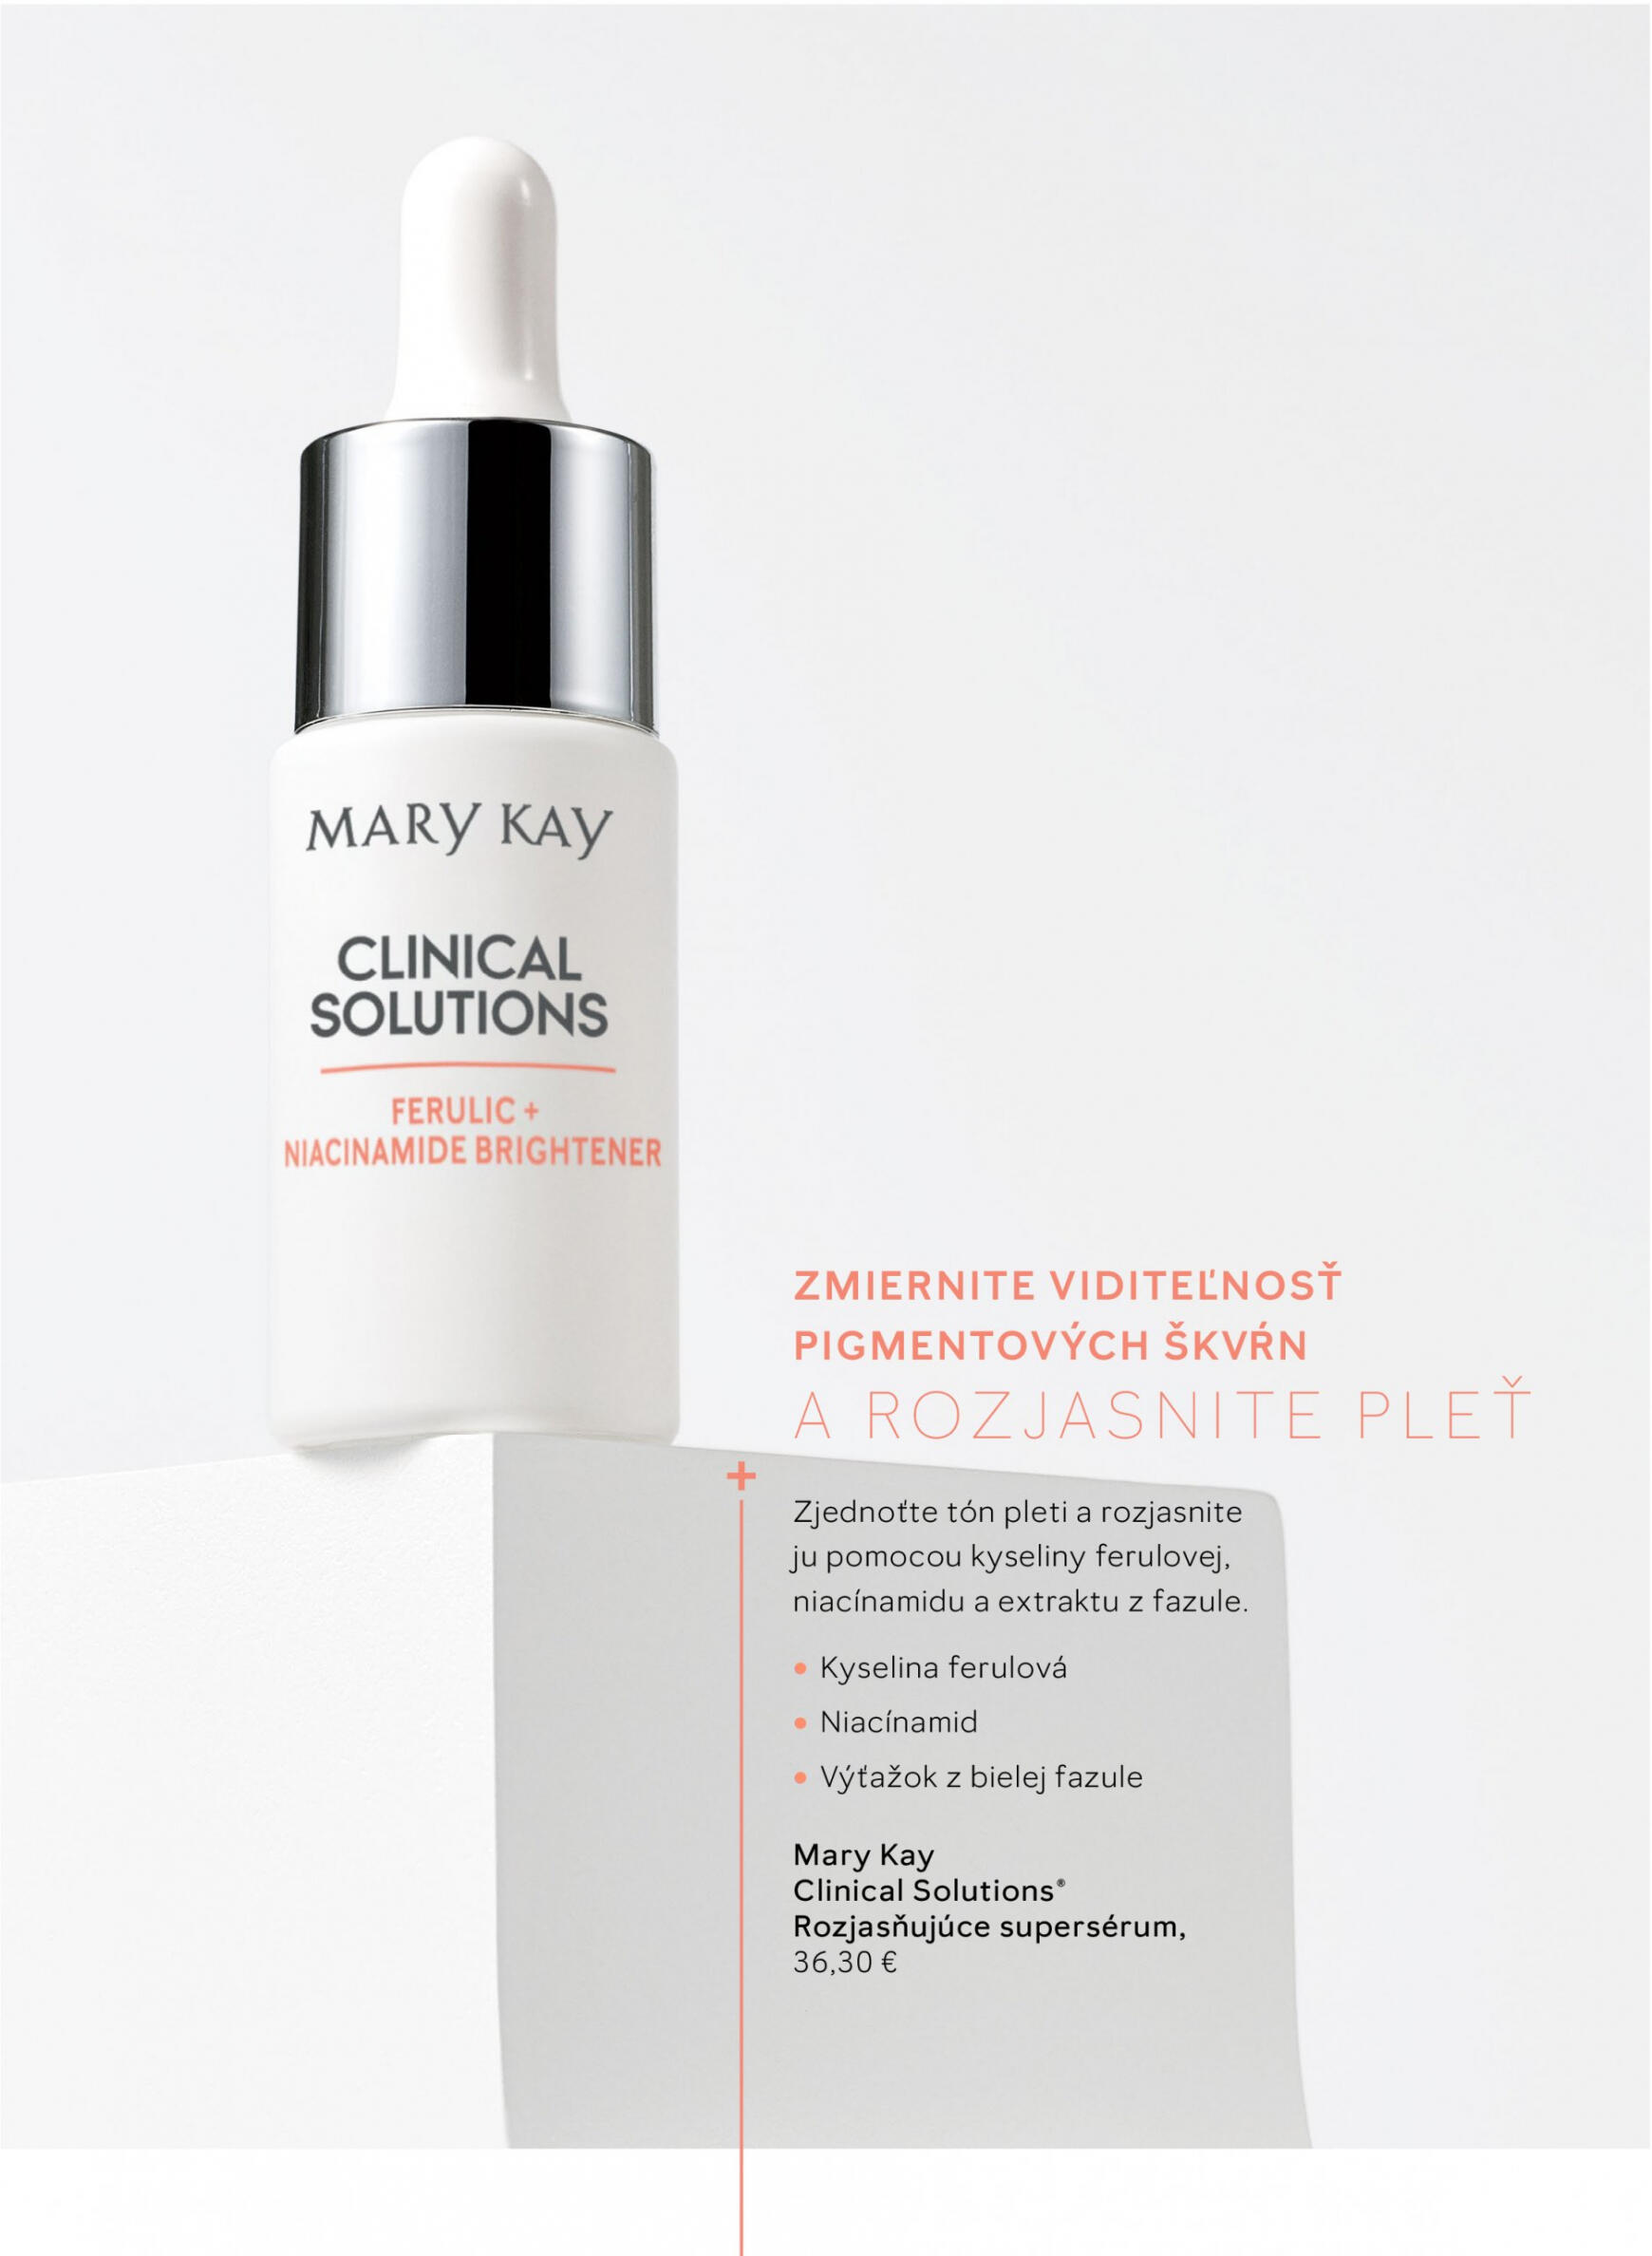 mary-kay - Mary Kay Clinical Solutions® - page: 8